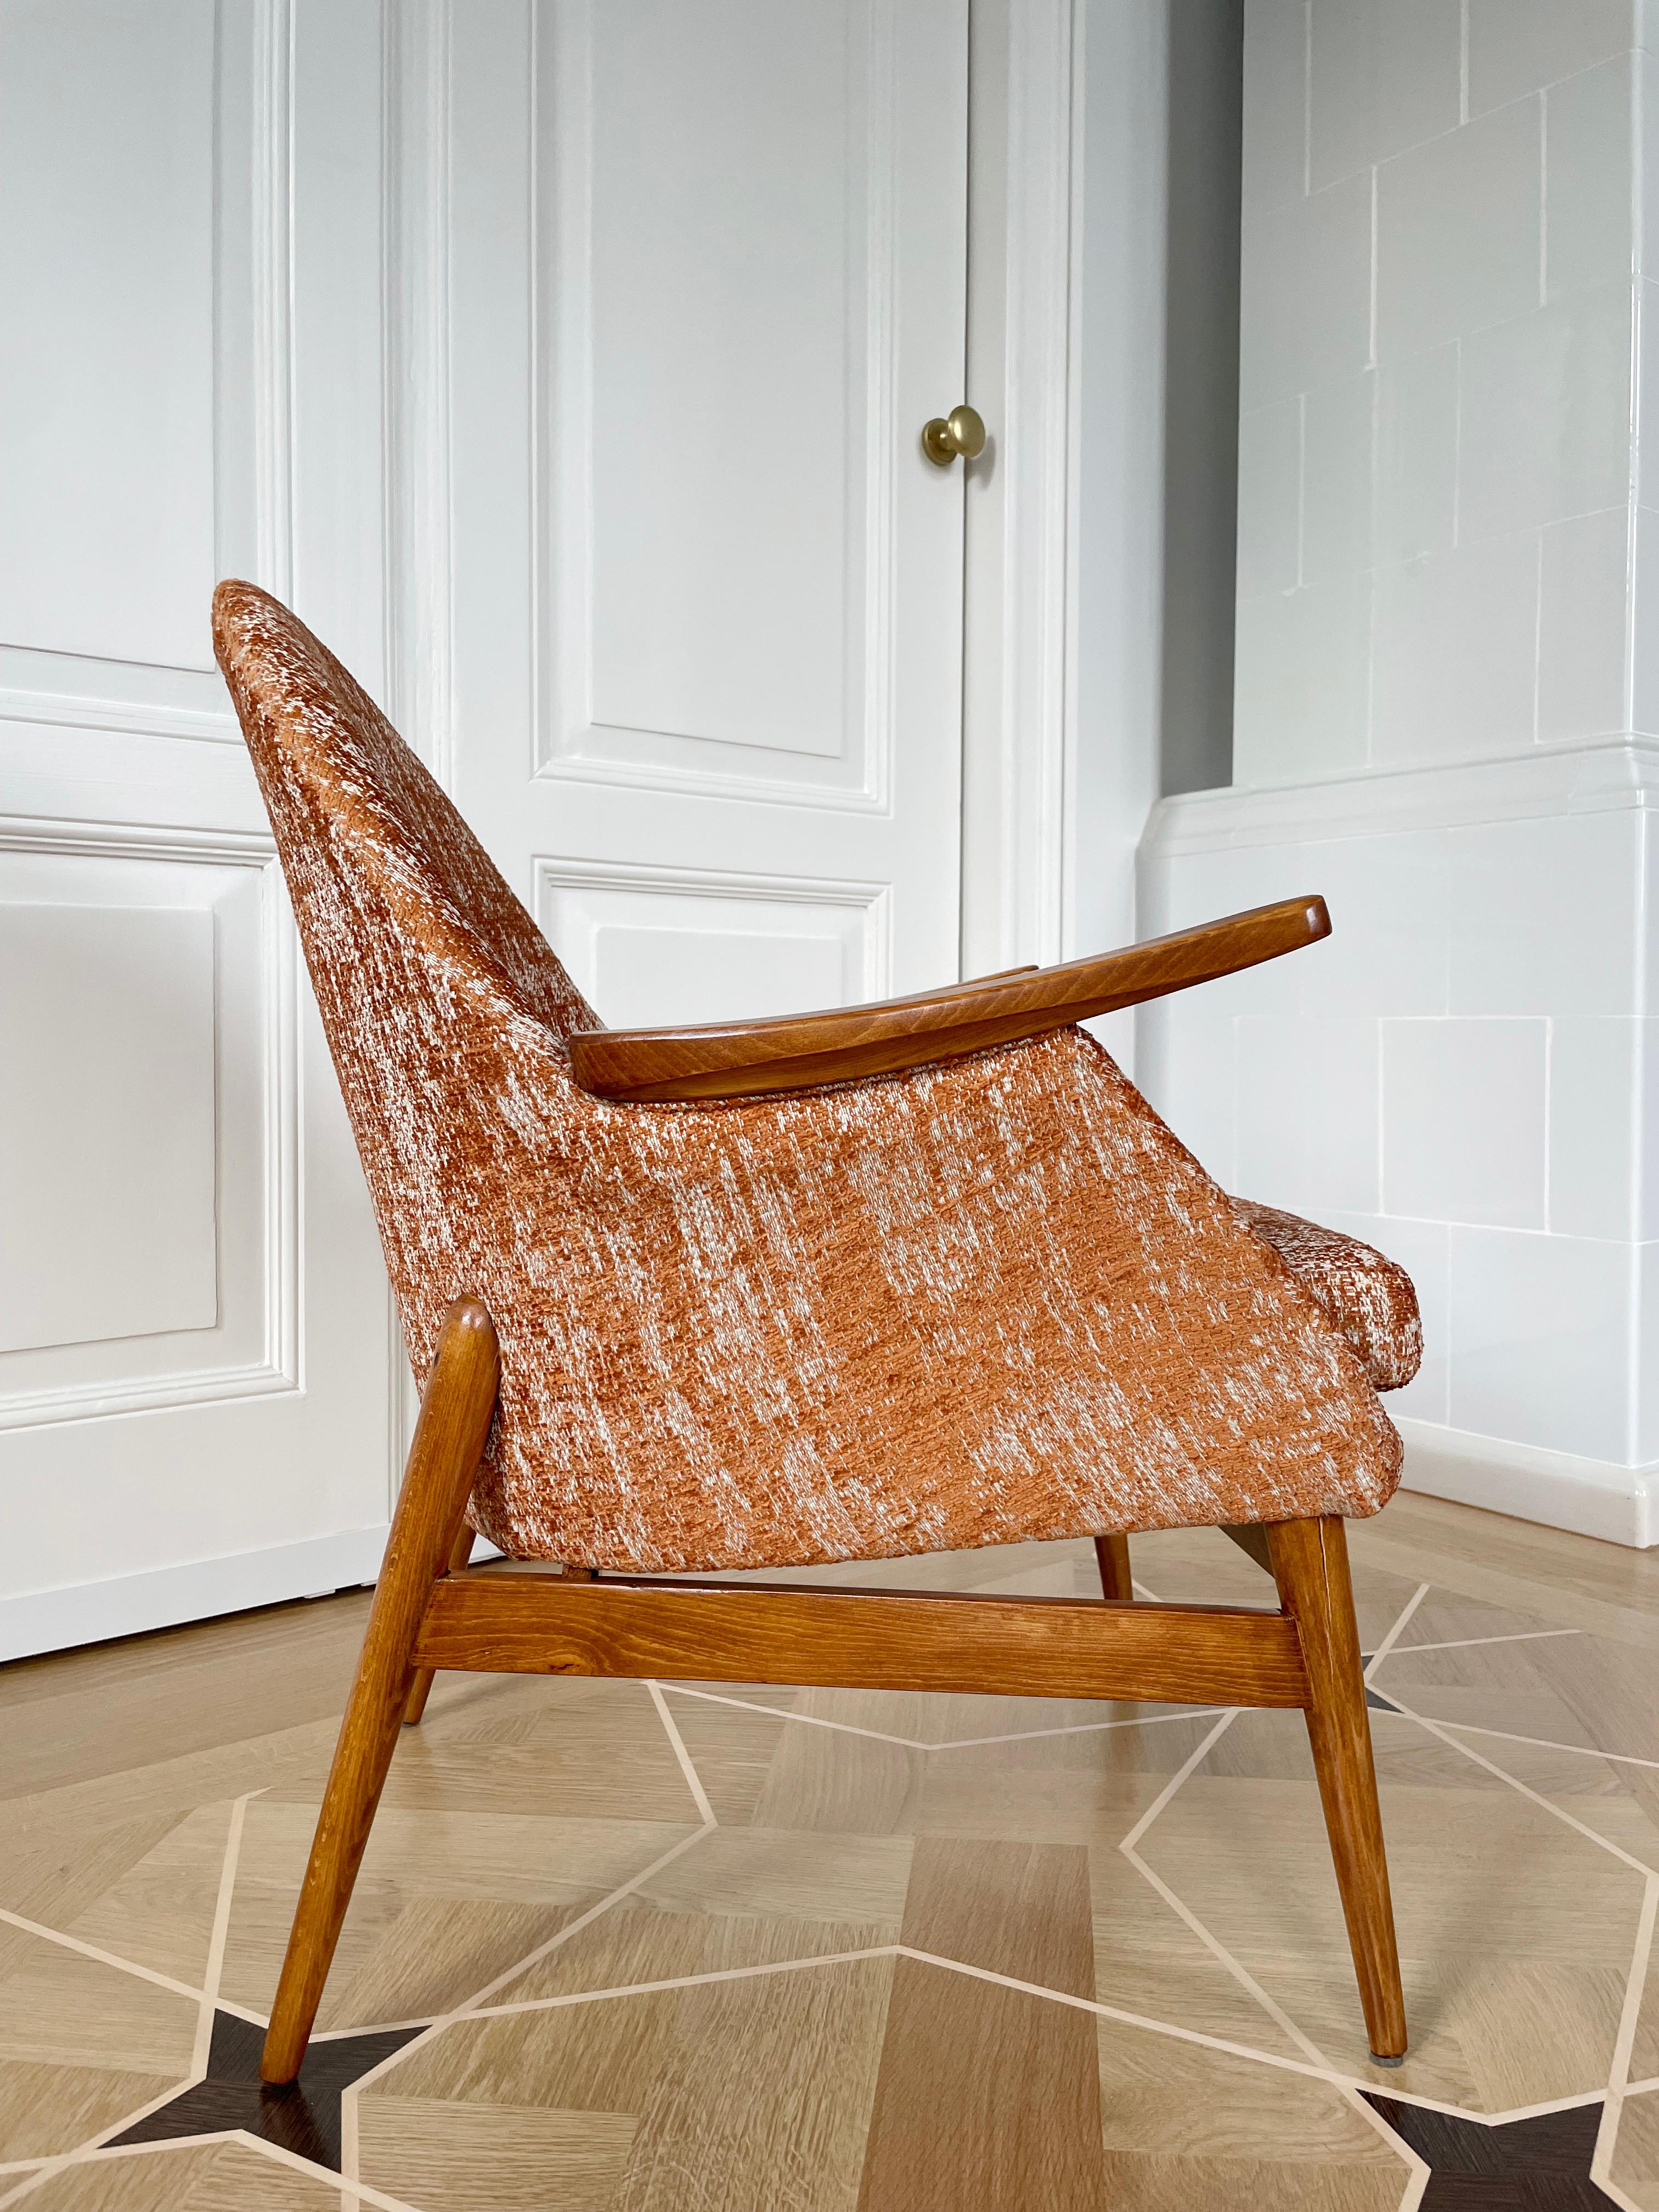 Hand-Crafted Mid-Century Swallow Armchair, Designed by Julia Gaubek, Europe, 1960s For Sale